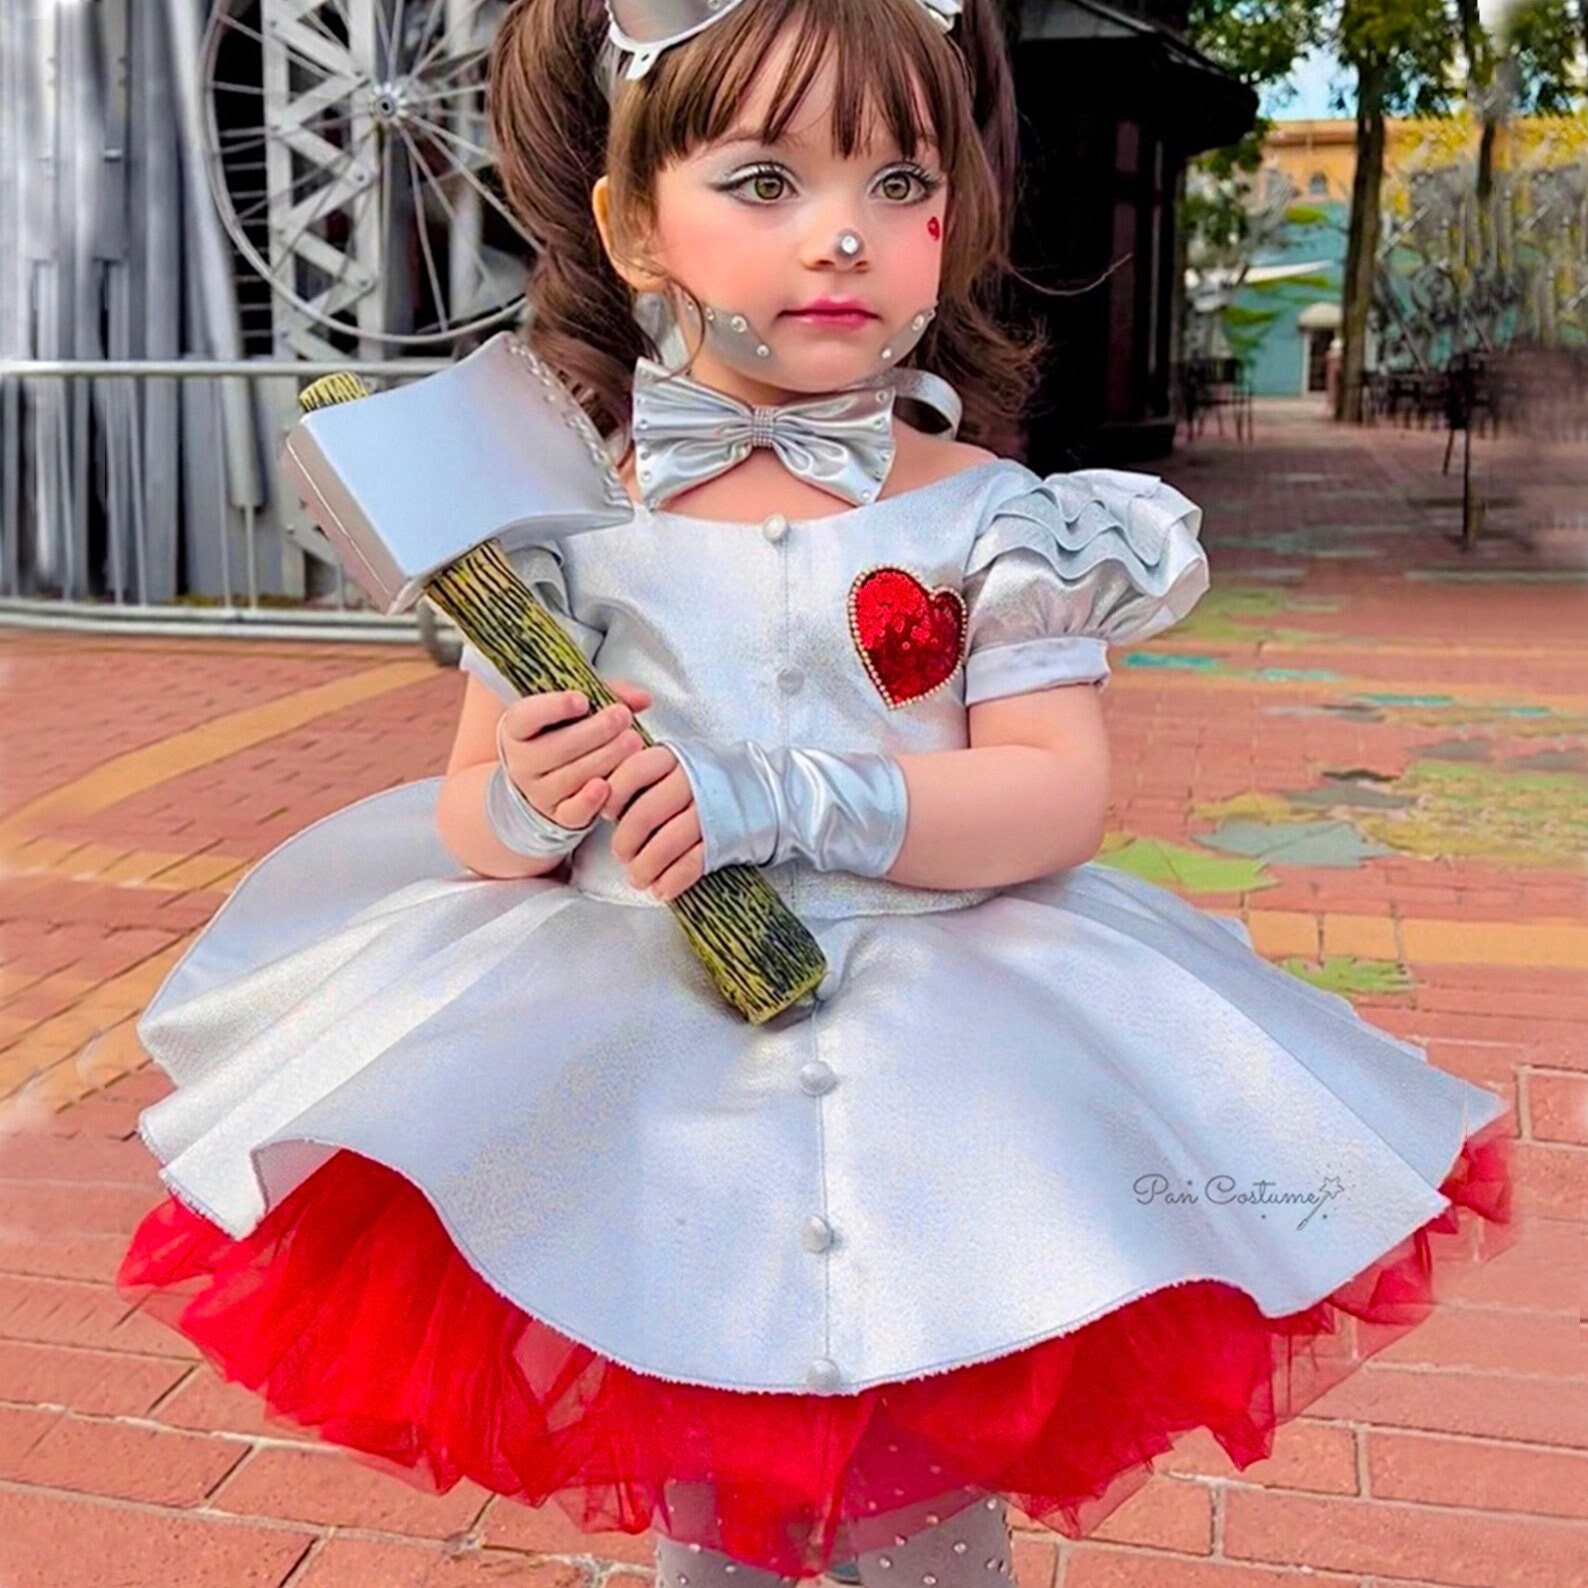 Woman Crochets Full Body Halloween Costumes For Her Kids (11 Pics